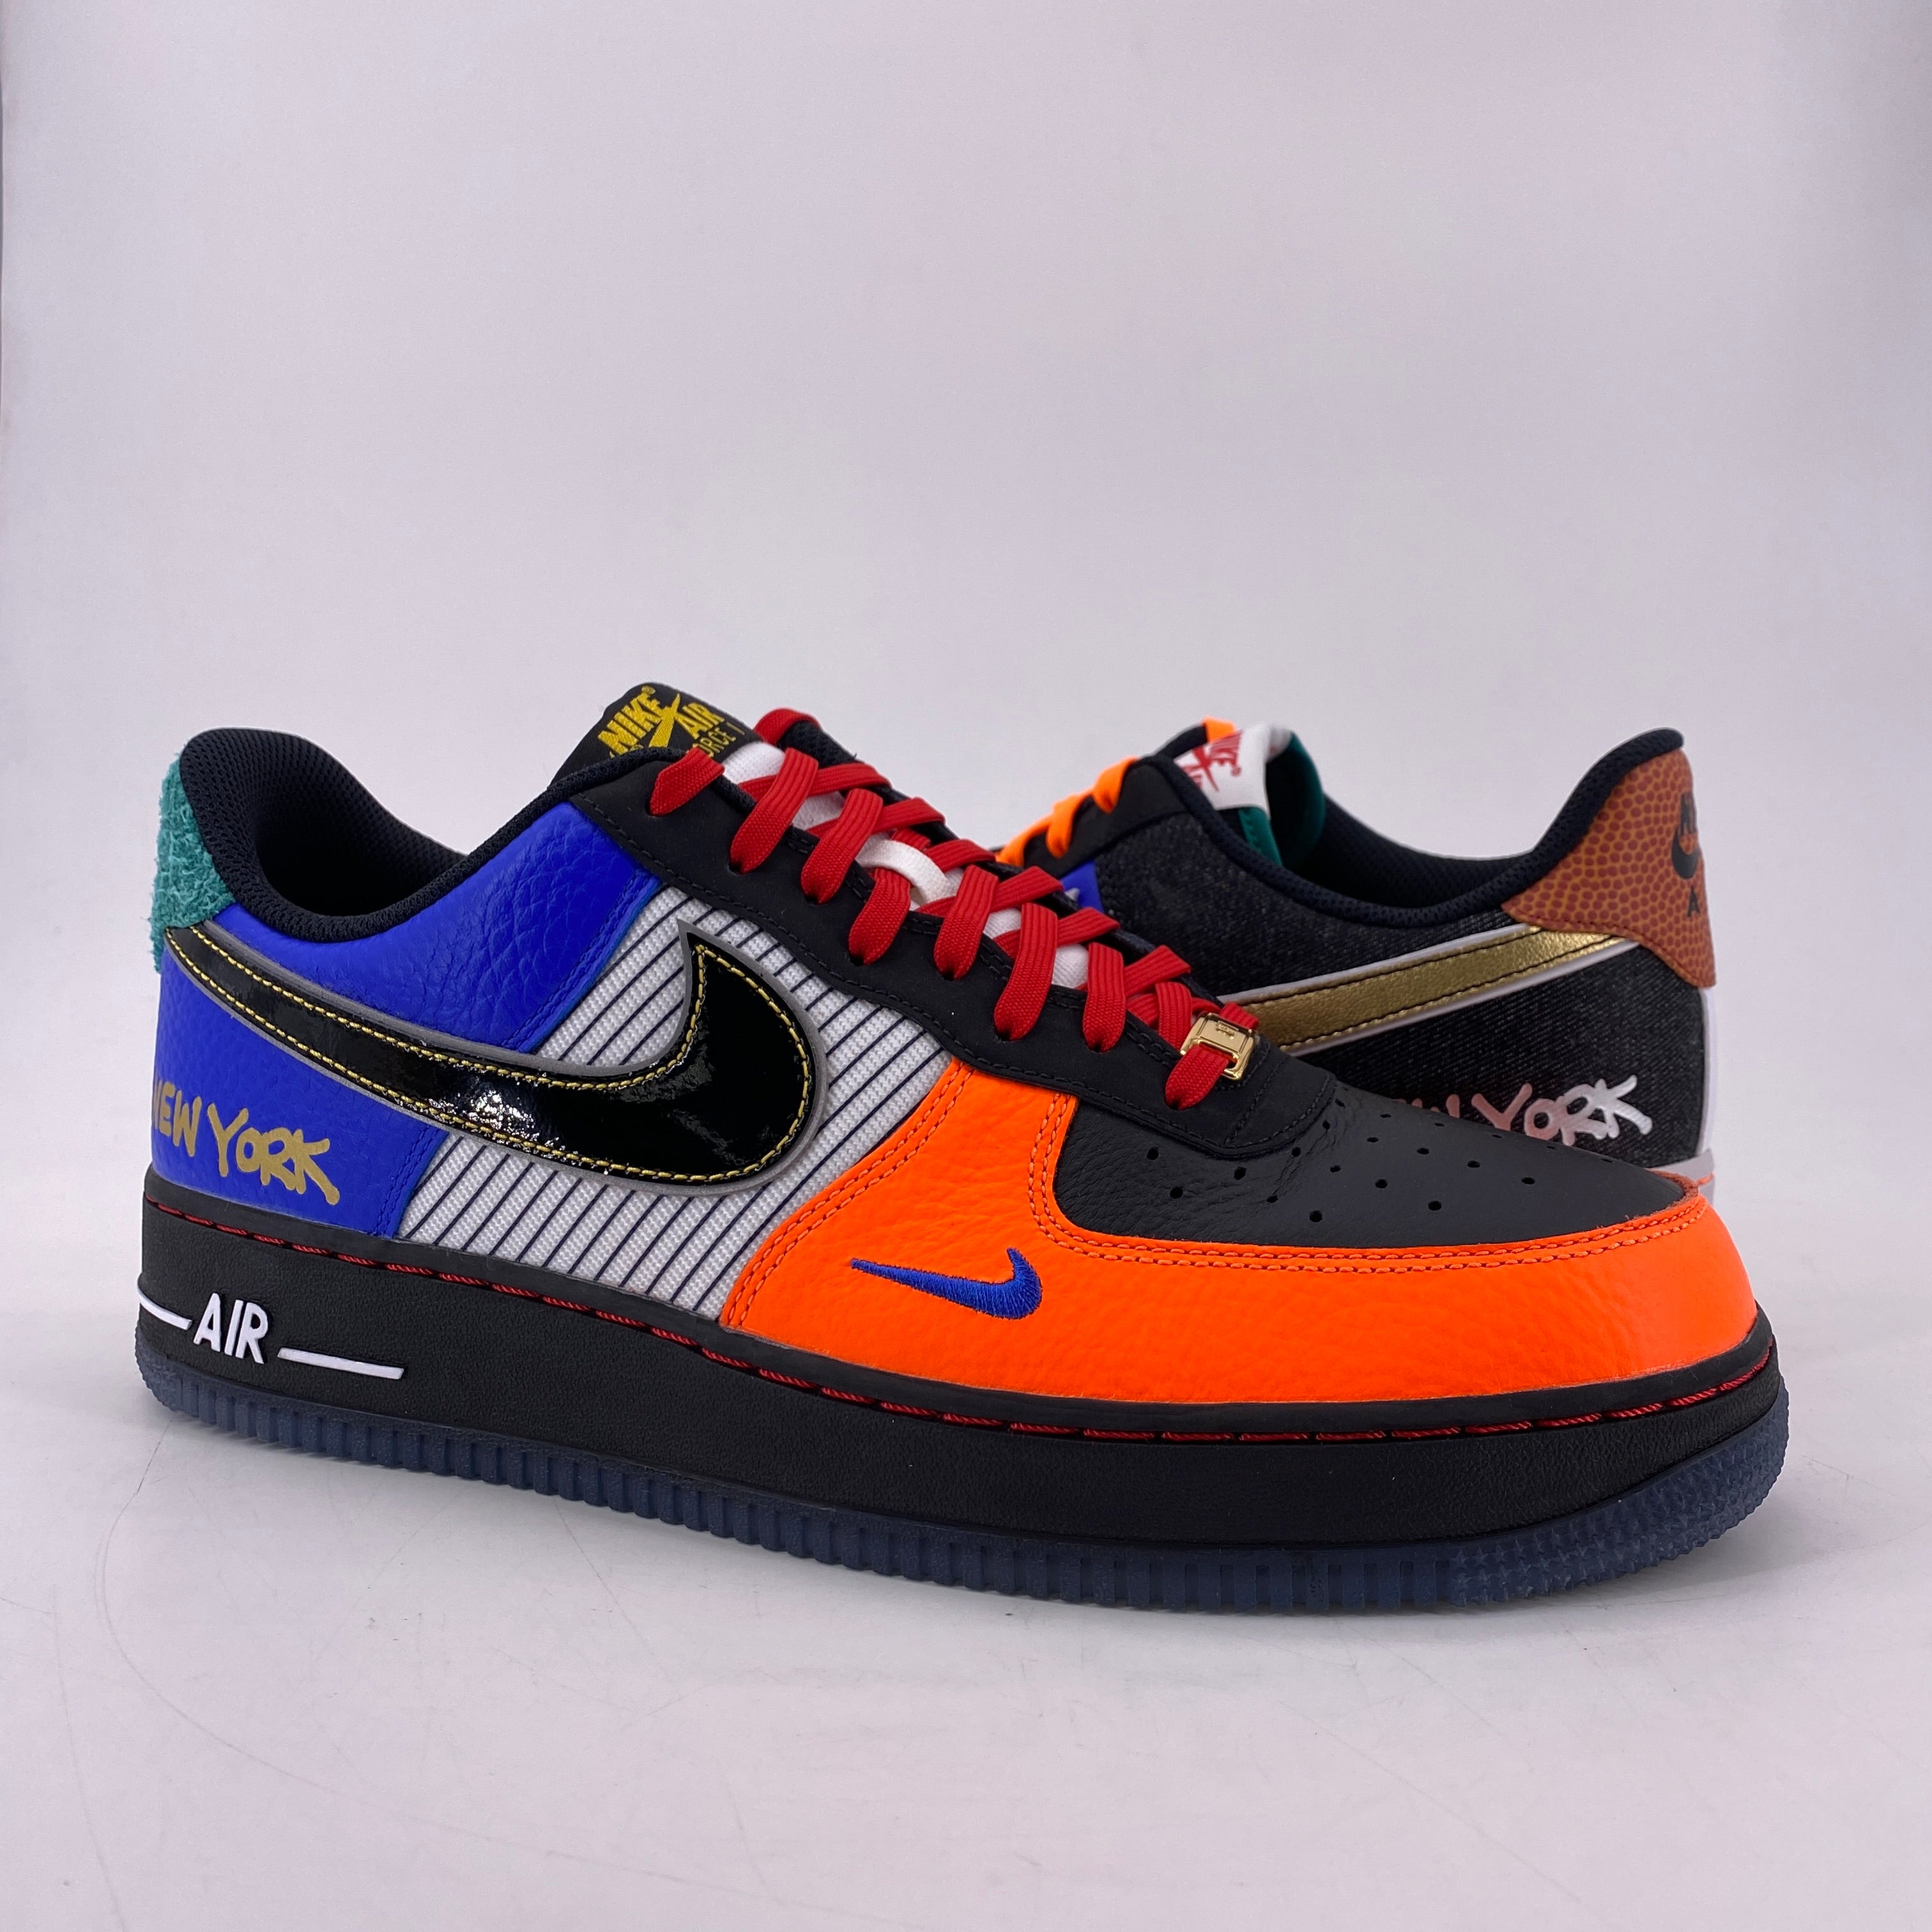 Nike Air Force 1 '07 "Nyc City Of Athletes" 2019 New Size 10.5